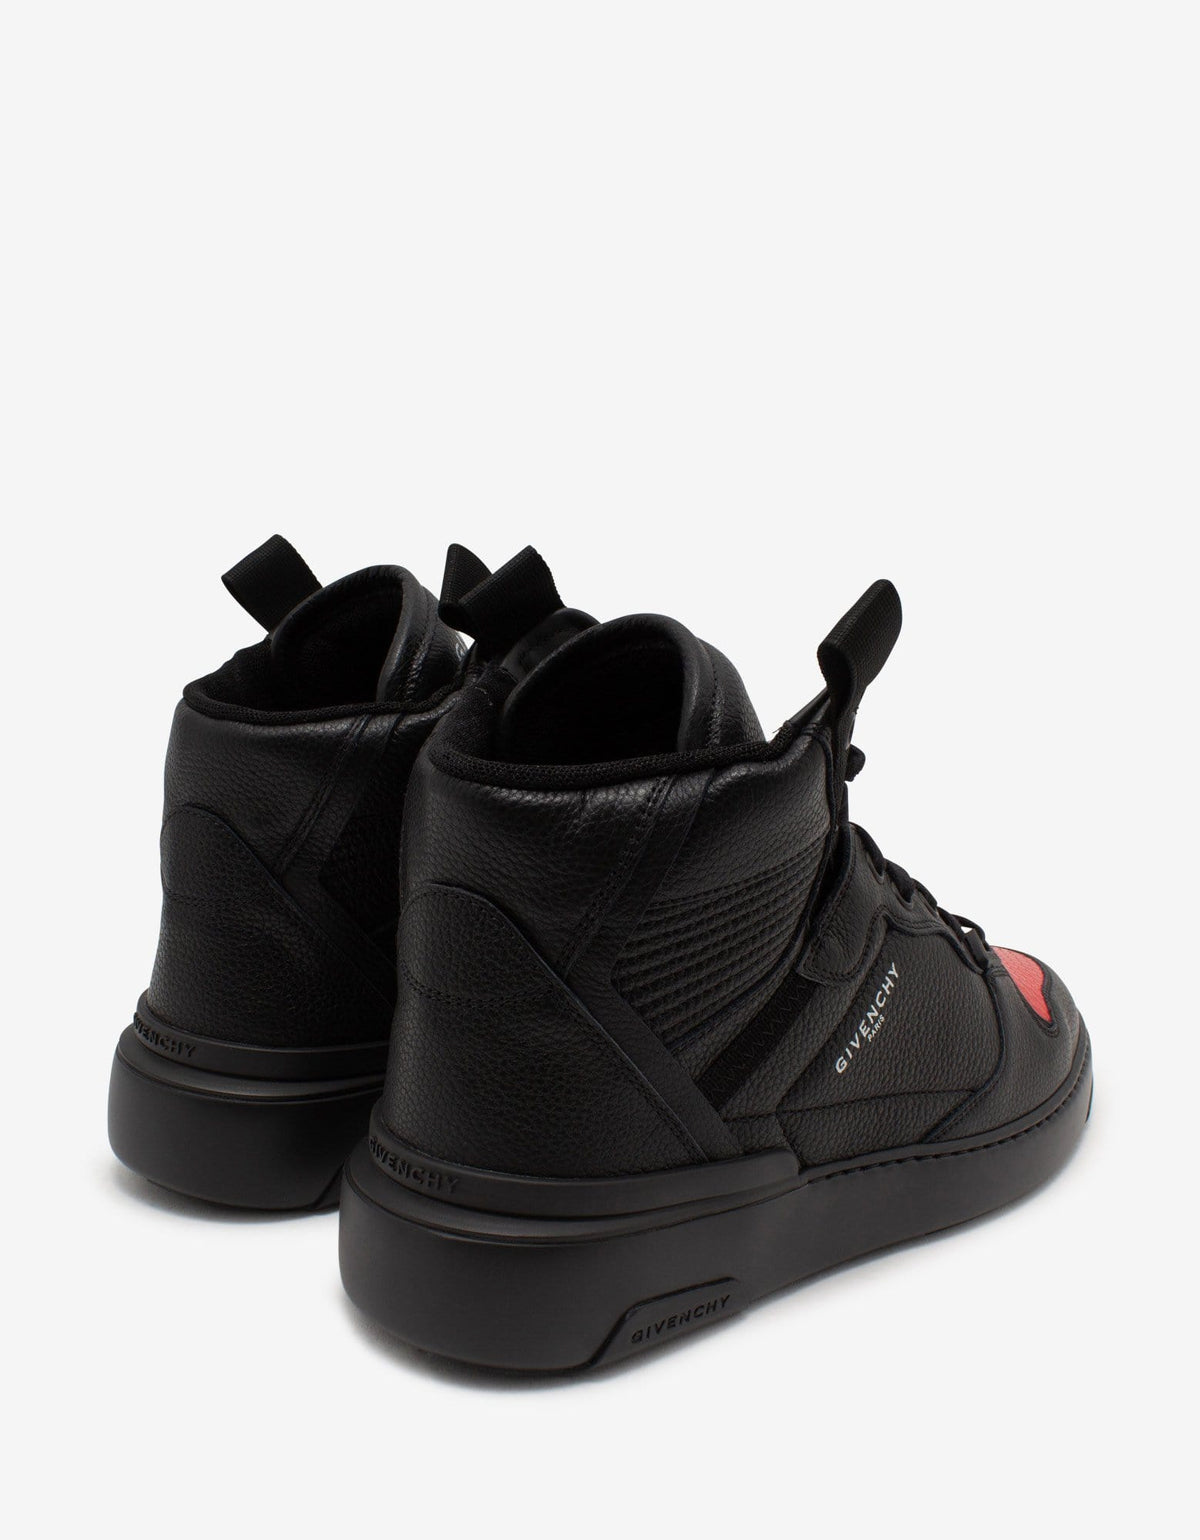 Givenchy Black Leather Wing High Trainers